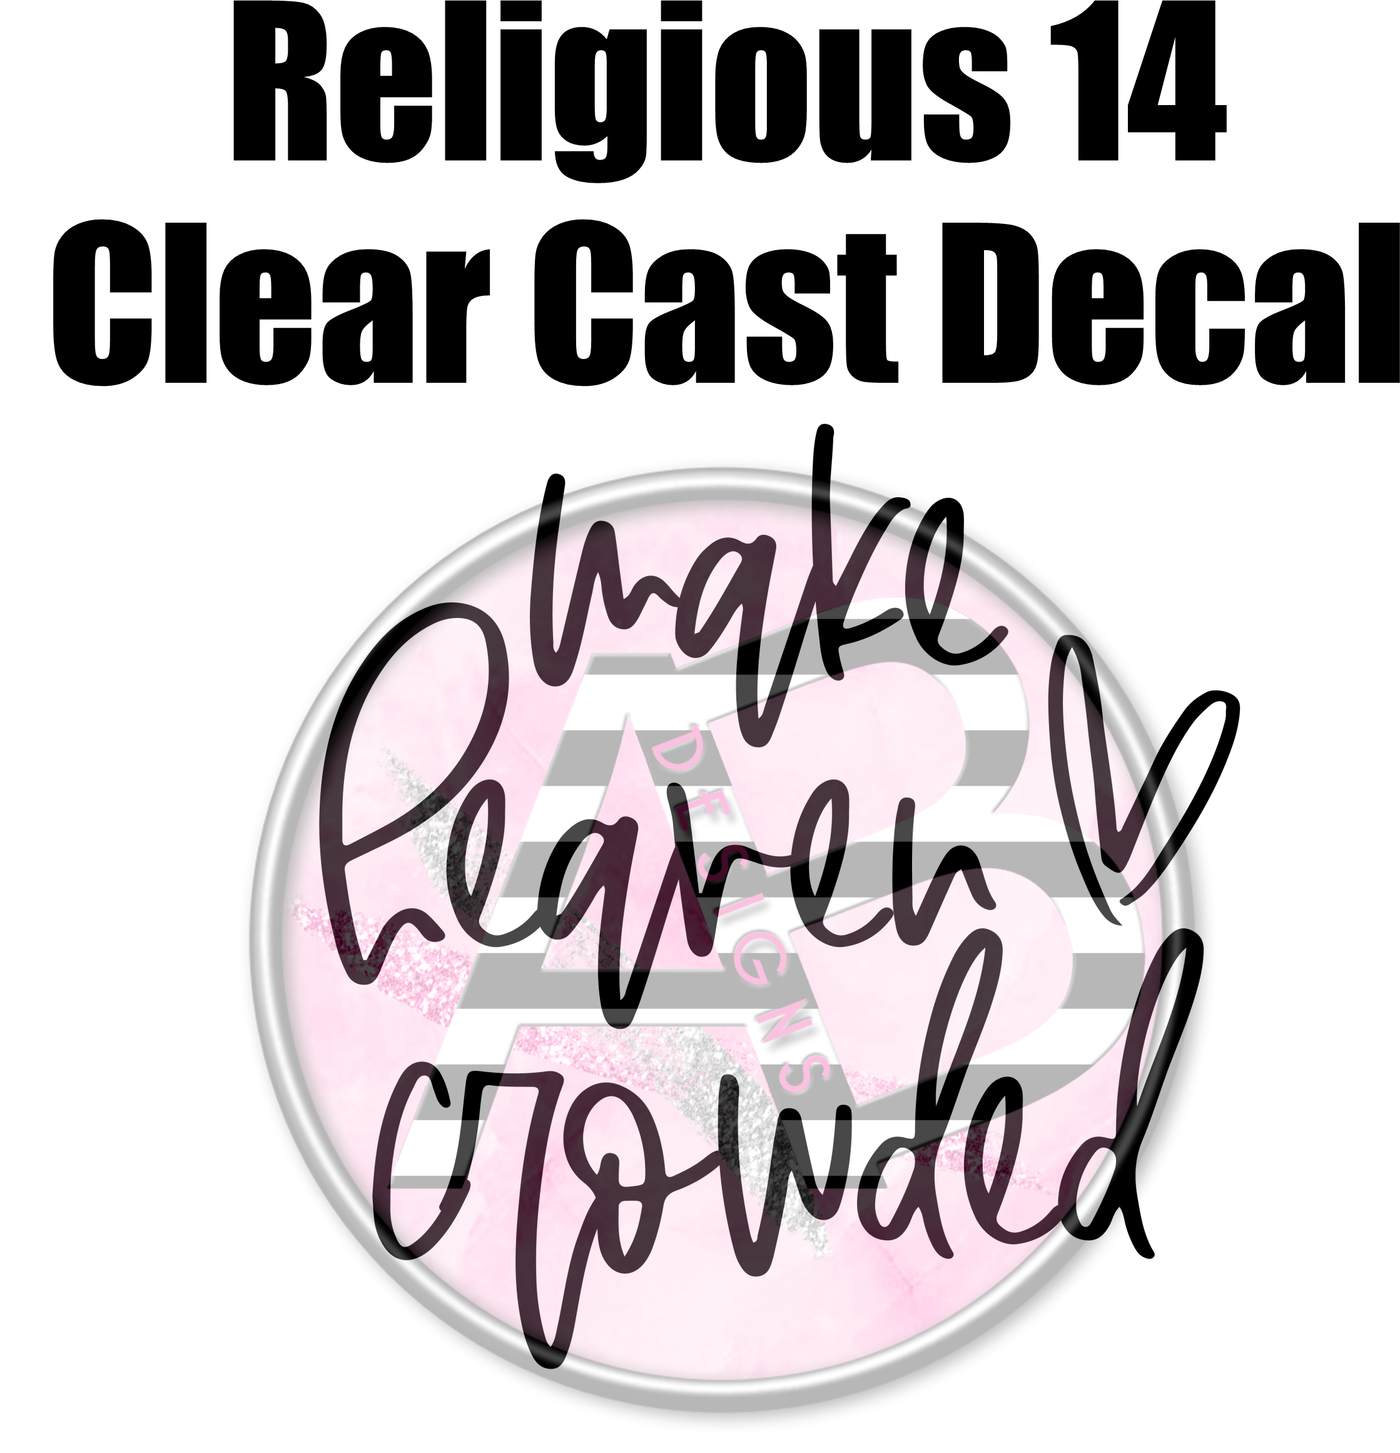 Religious 14 - Clear Cast Decal